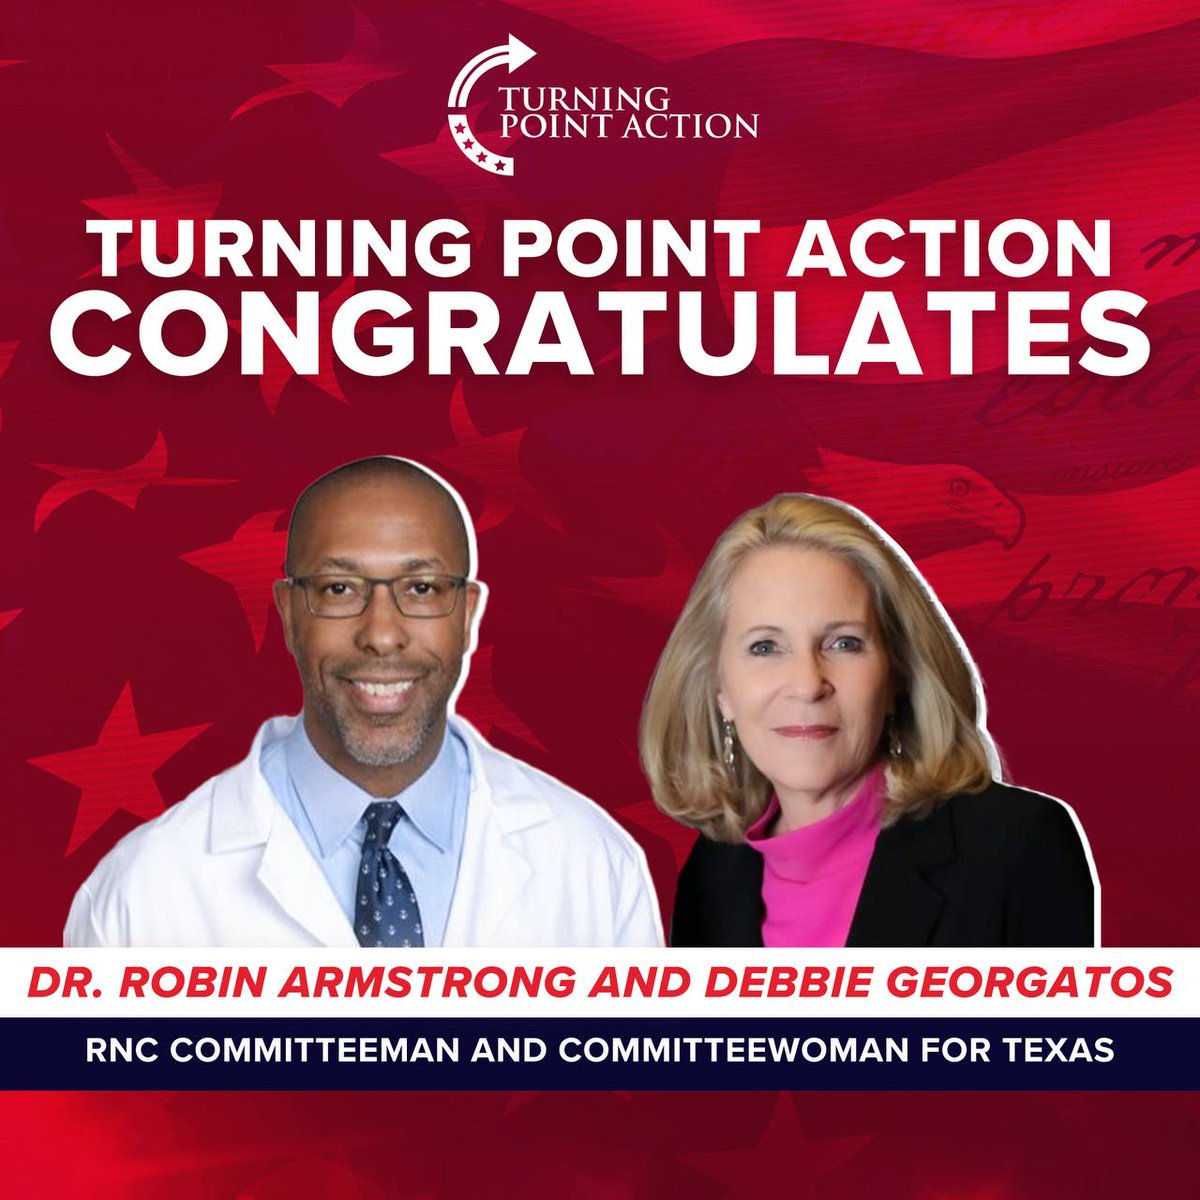 Big wins in Texas this weekend! Congratulations @DebbieCanWeTalk on winning her RNC Committeewoman race & @Robinlynnarmst1 on his re-election as RNC Committeeman for the @TexasGOP 👏🏼